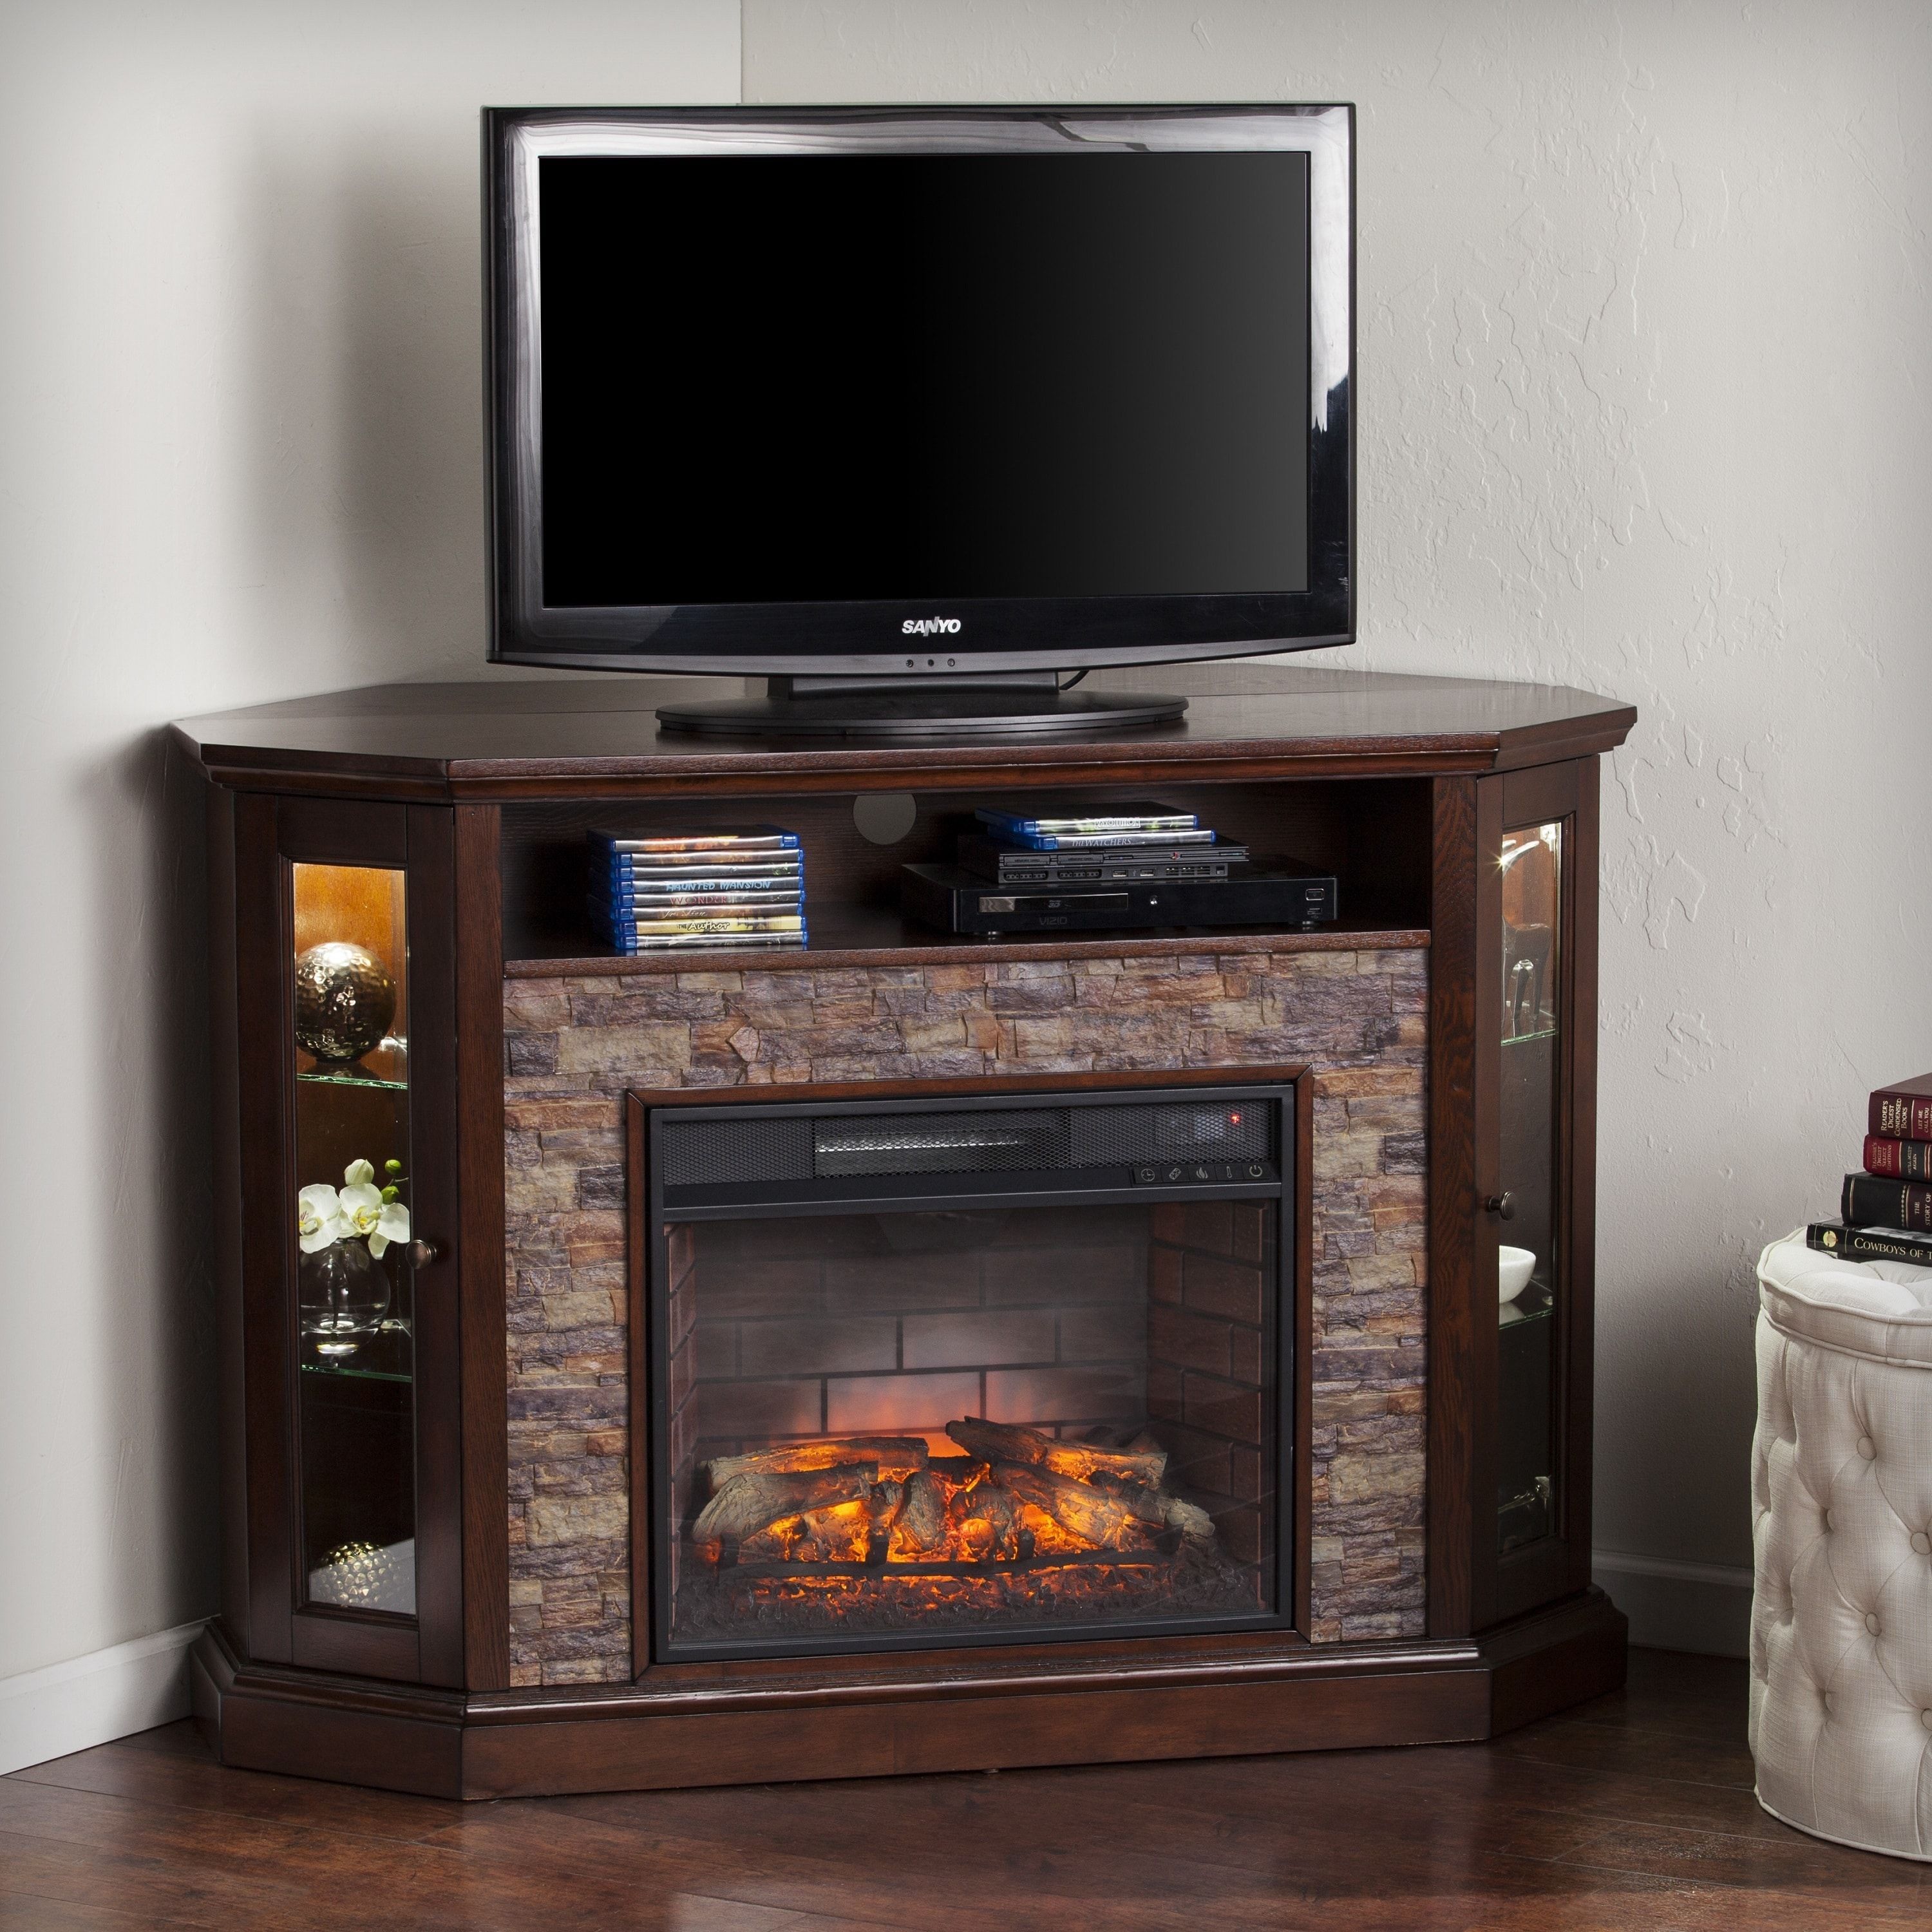 Corner Fireplace Tv Stand Awesome Harper Blvd Ratner Faux Stone Corner Convertible Infrared